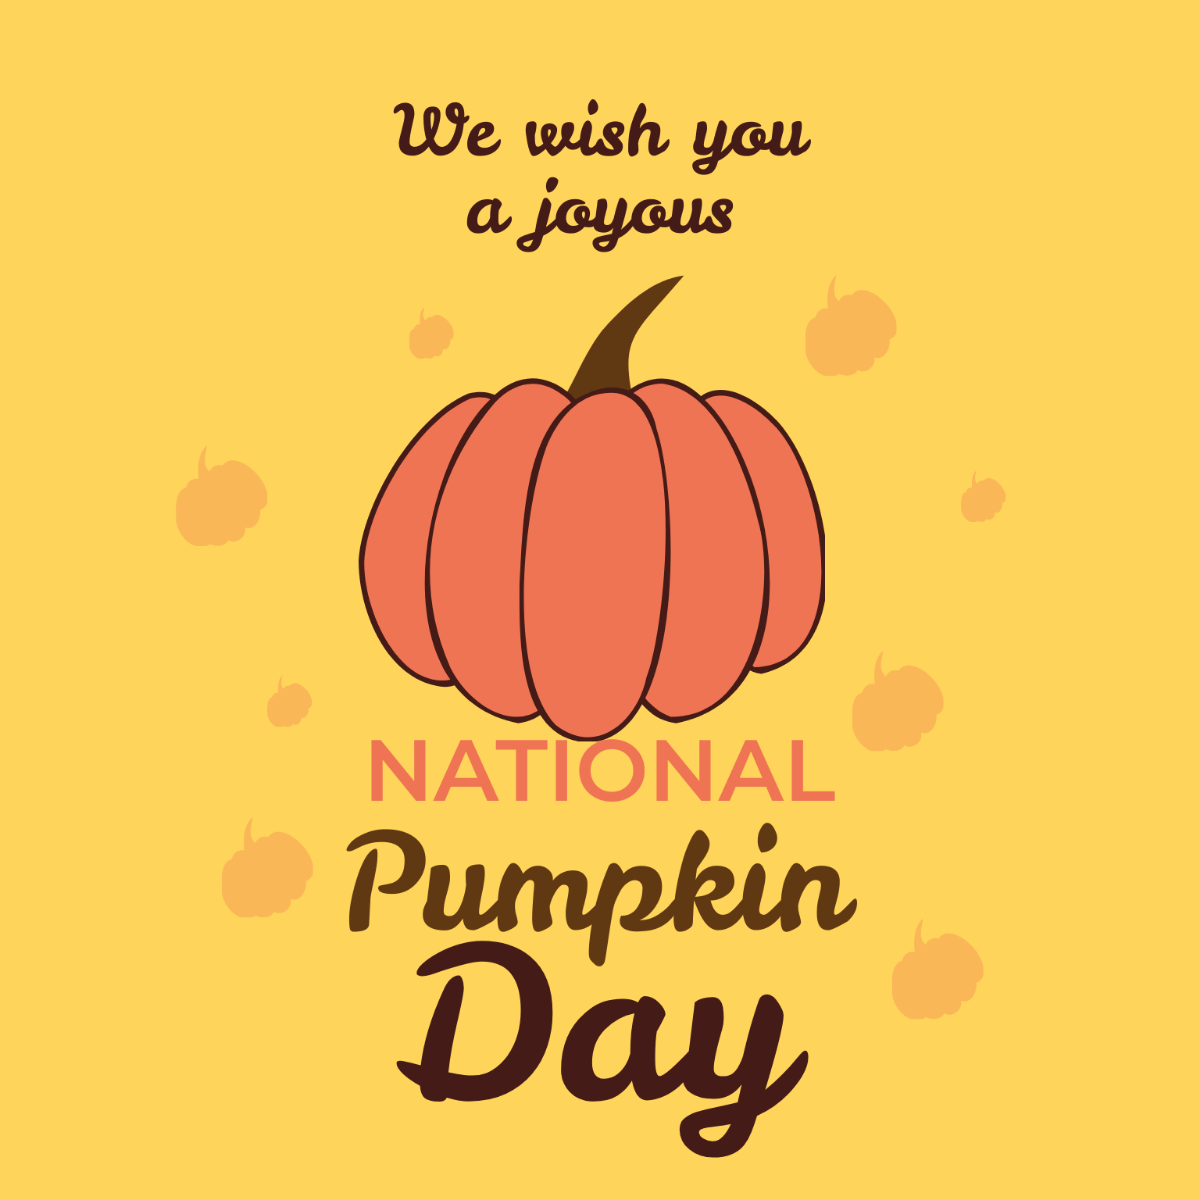 National Pumpkin Day Wishes Vector Template